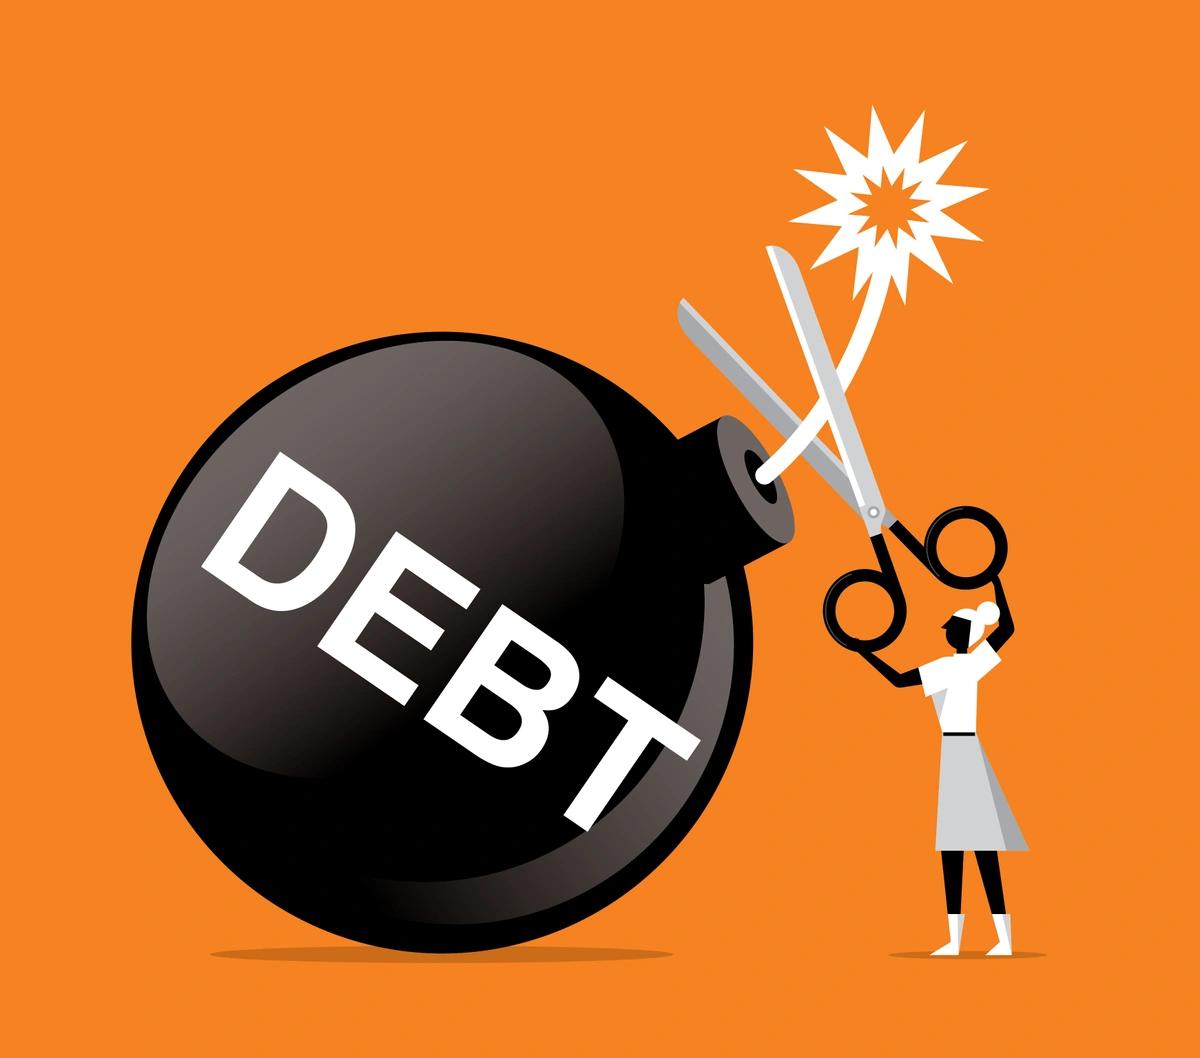 Illustration of a woman snipping lit fuse off a debt bomb with scissors